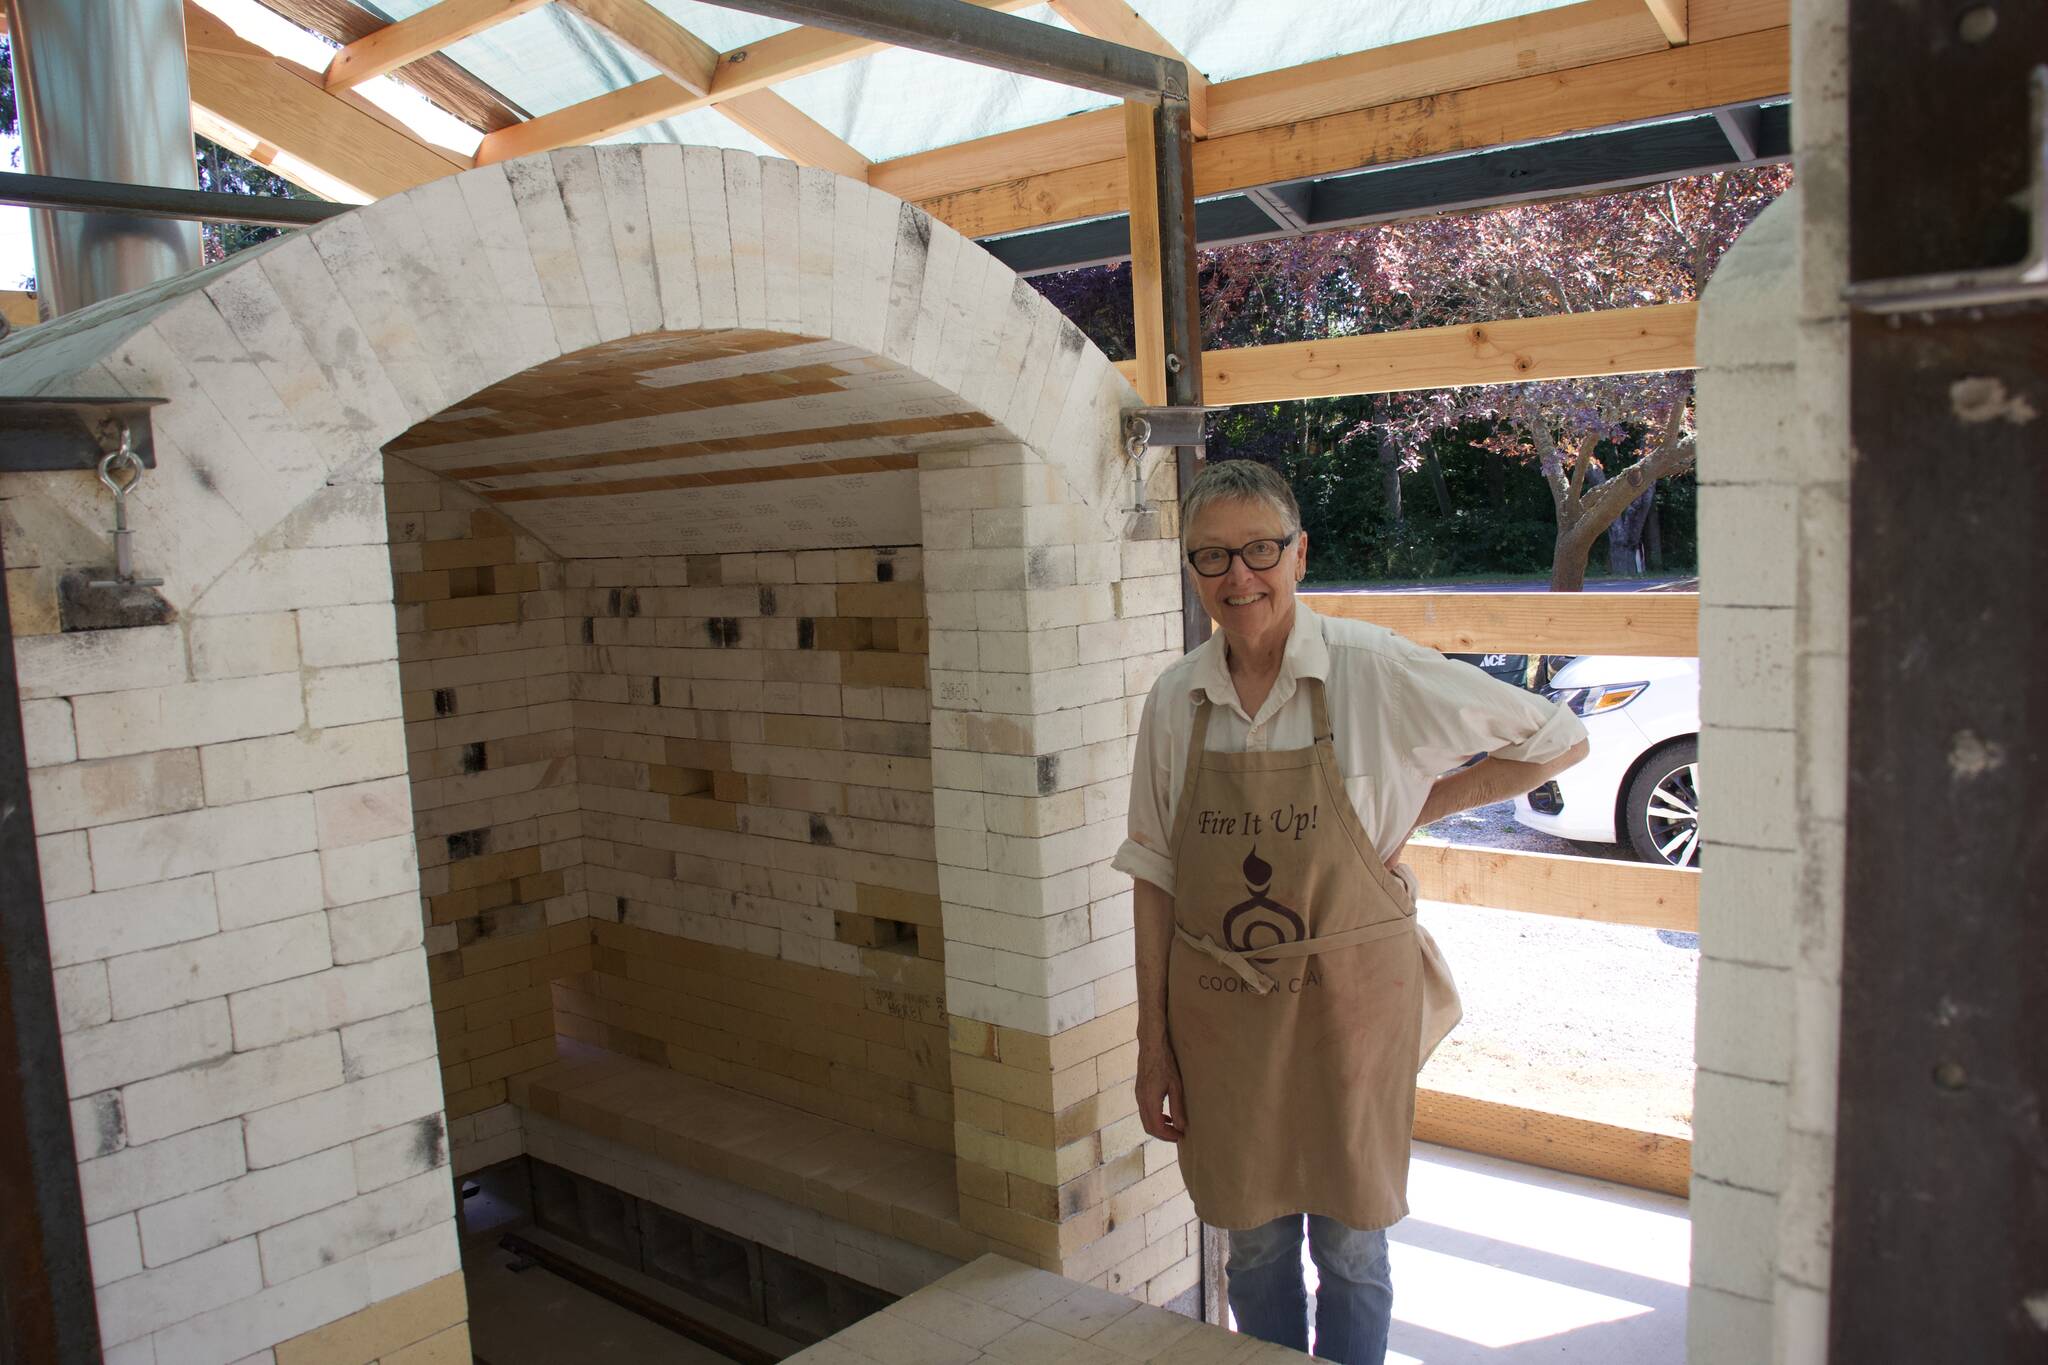 Photo by Rachel Rosen/Whidbey News-Times
Robbie Lobell is a co-owner of Cook on Clay, which is currently in the process of constructing a new firing kiln next to her studio.